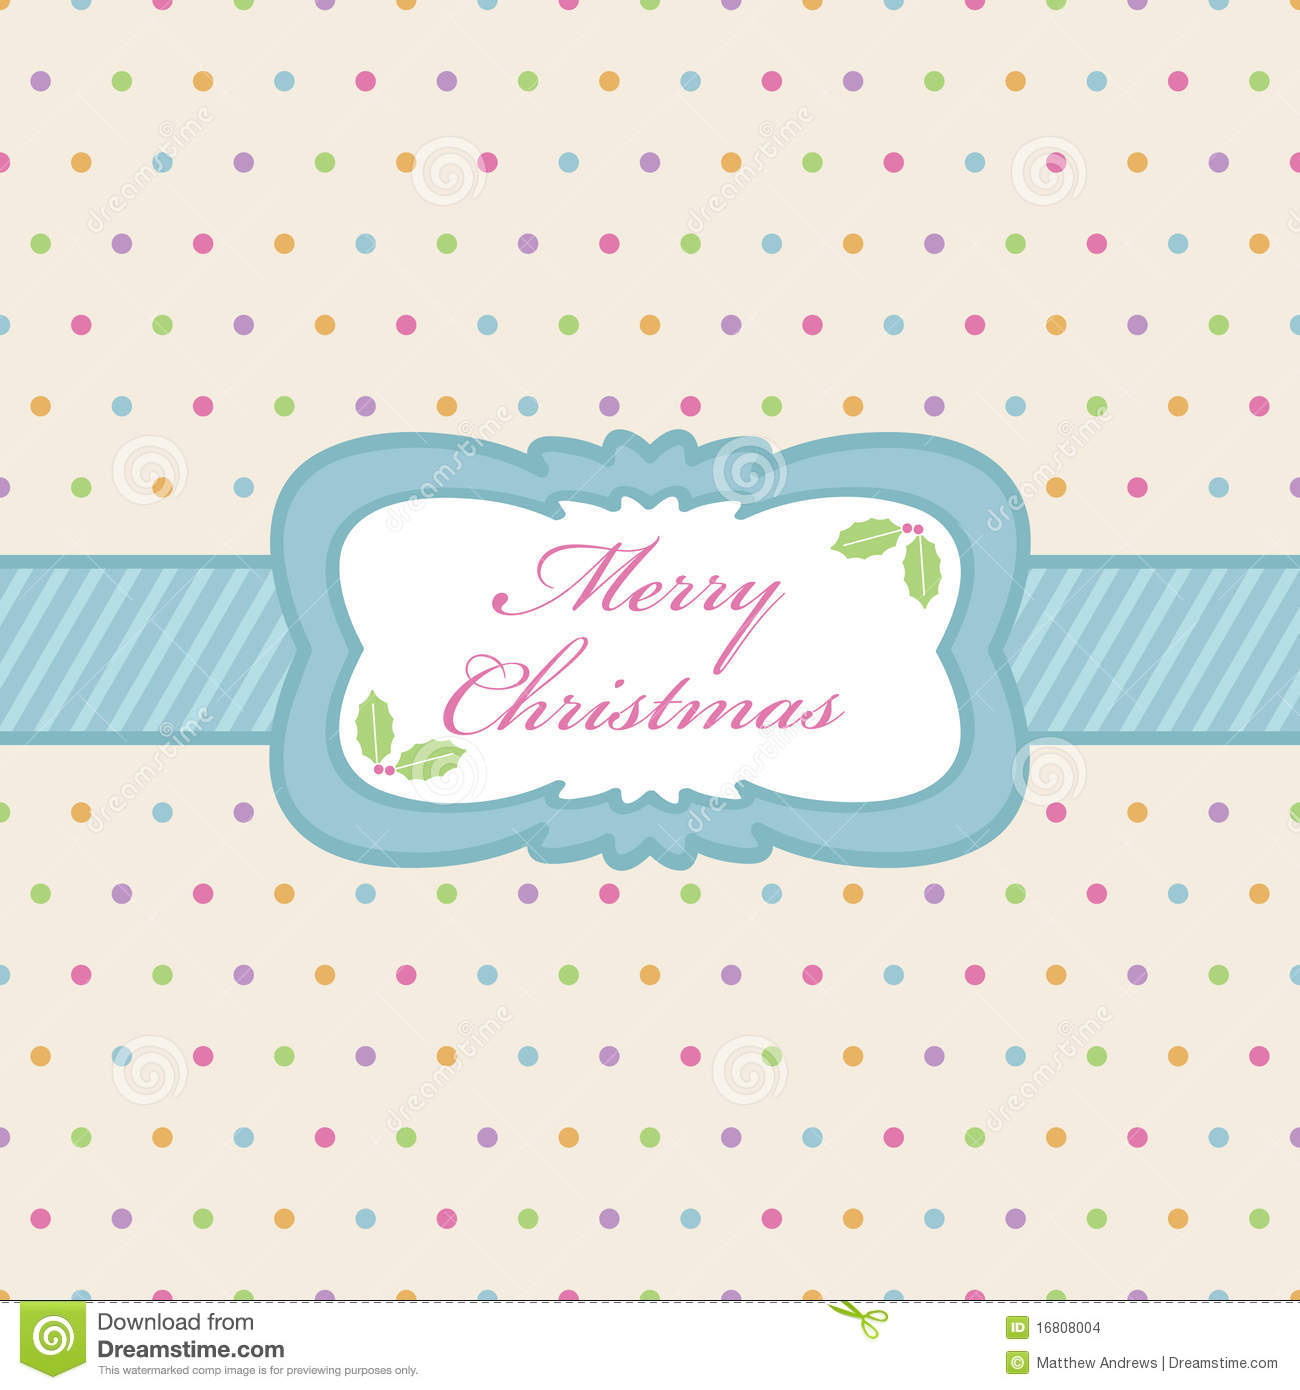 Polka Dot Background With Christmas Ribbon And Frame